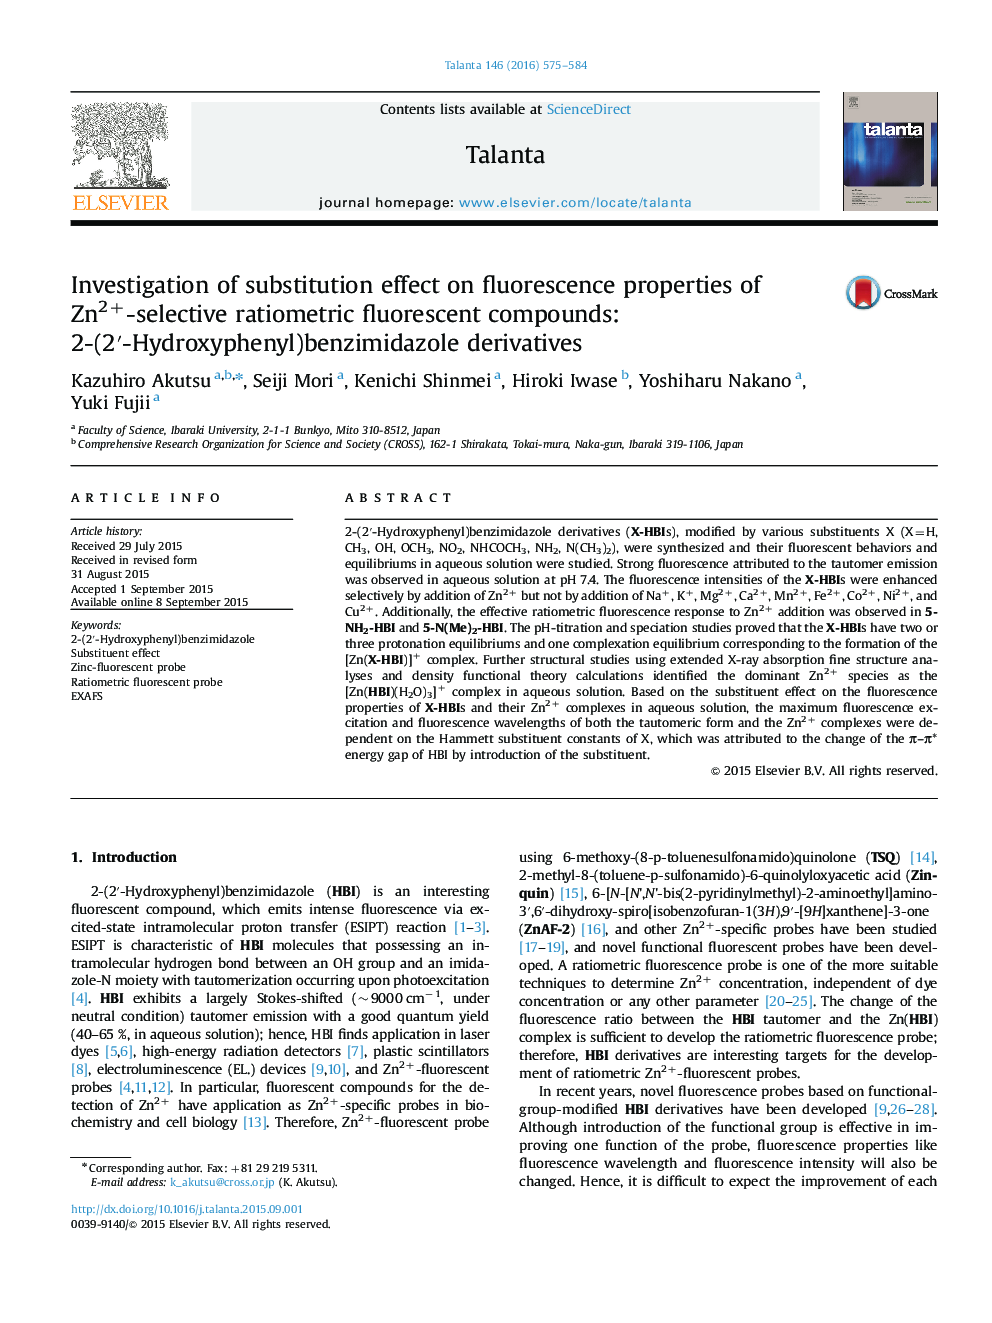 Investigation of substitution effect on fluorescence properties of Zn2+-selective ratiometric fluorescent compounds: 2-(2â²-Hydroxyphenyl)benzimidazole derivatives